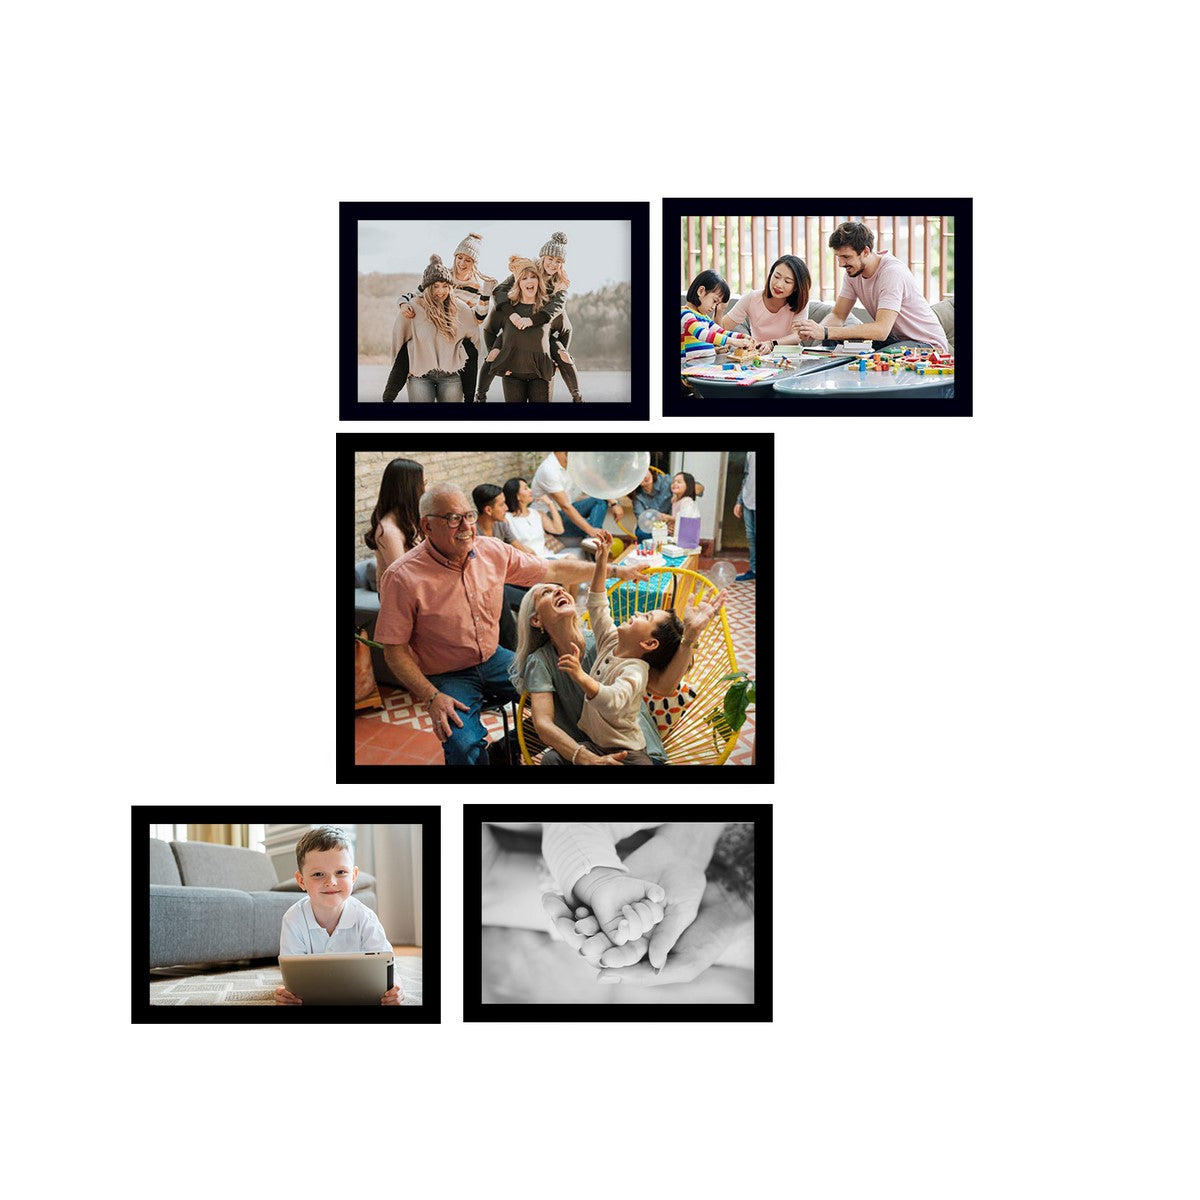 Memory Wall Collage Photo Frame - Set of 5 Photo Frames for 4 Photos of 5"x7", 1 Photos of 8"x10"